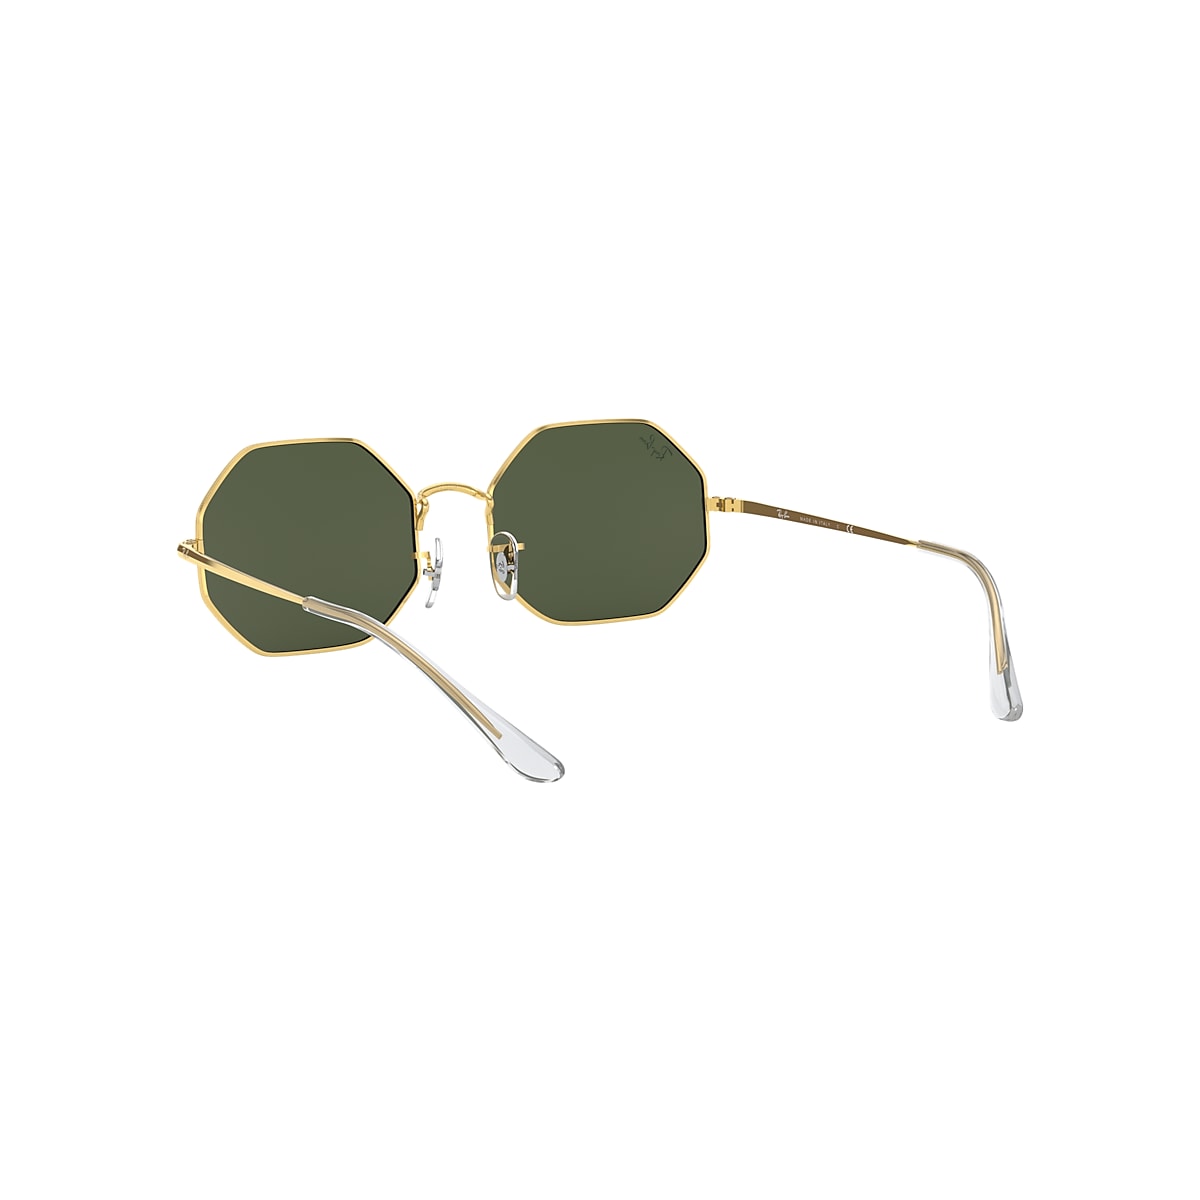 Plausible Ese Especializarse OCTAGON 1972 Sunglasses in Gold and Green - RB1972 | Ray-Ban® US